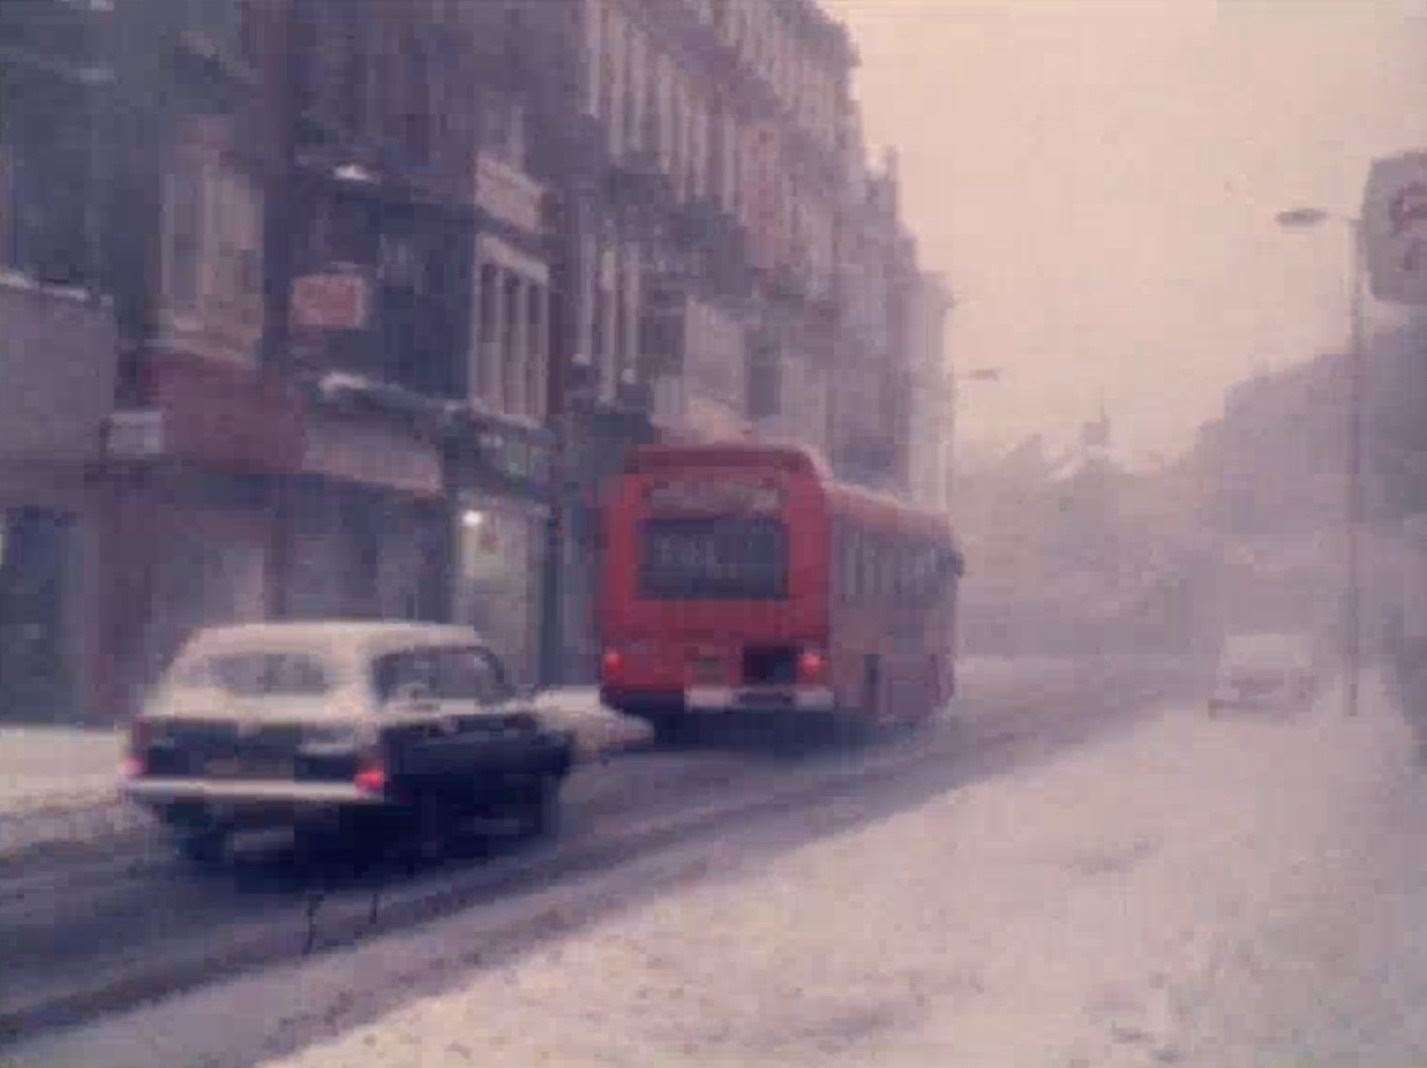 A bus and car negotiating treacherous conditions more than 40 years ago. Picture: Dover Museum